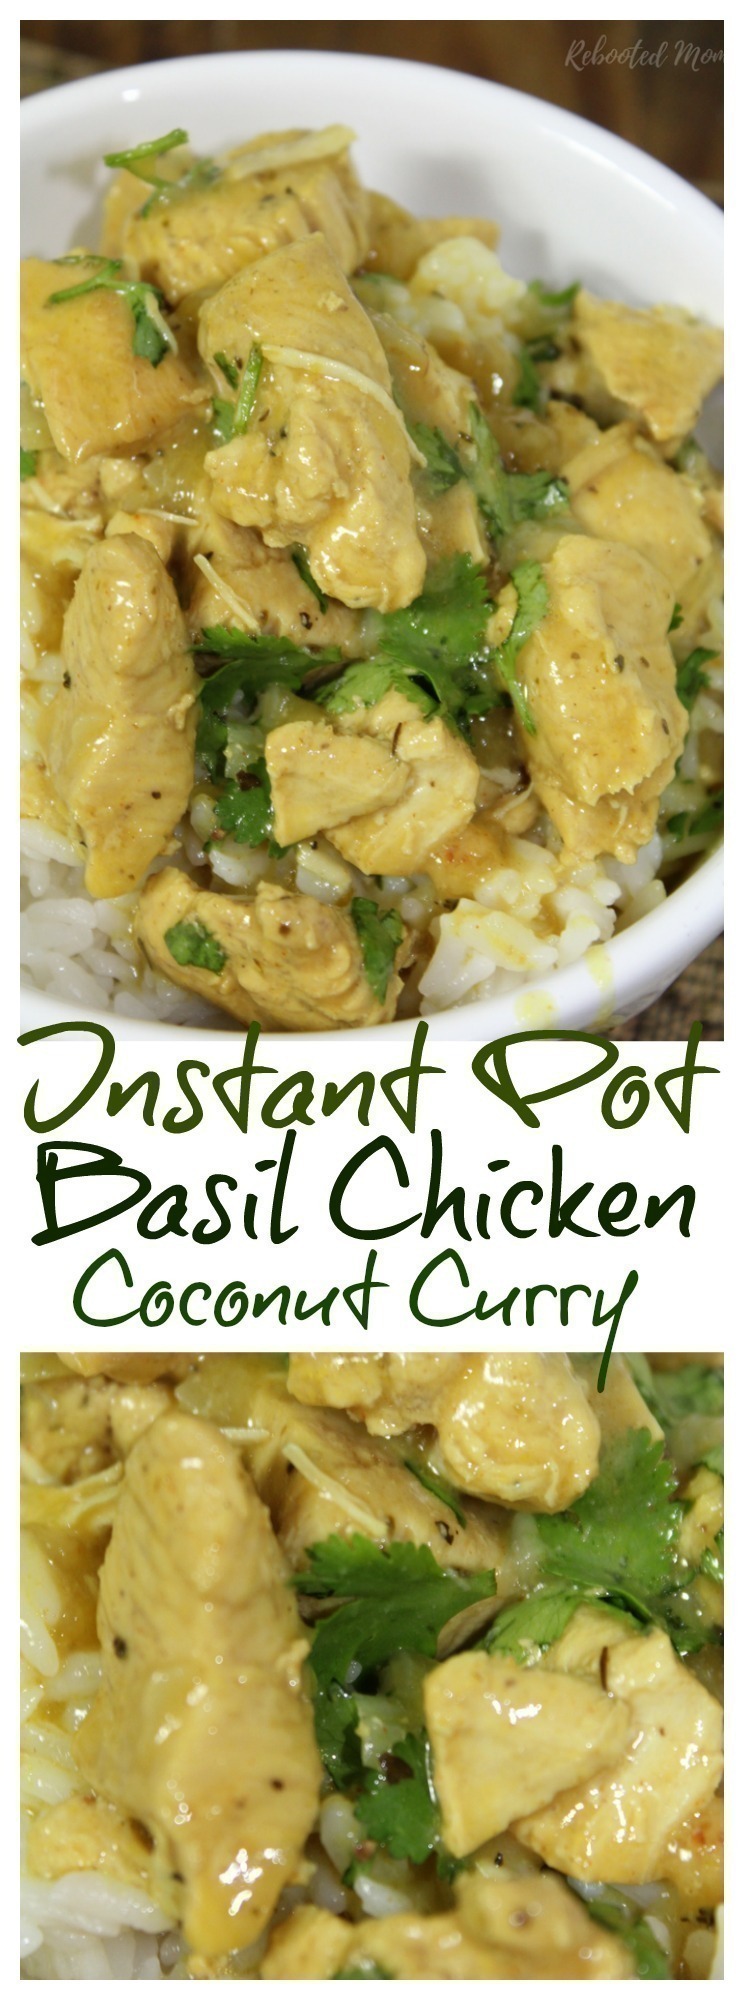 An incredibly easy basil chicken coconut curry created in less than 15 minutes using your Instant Pot.